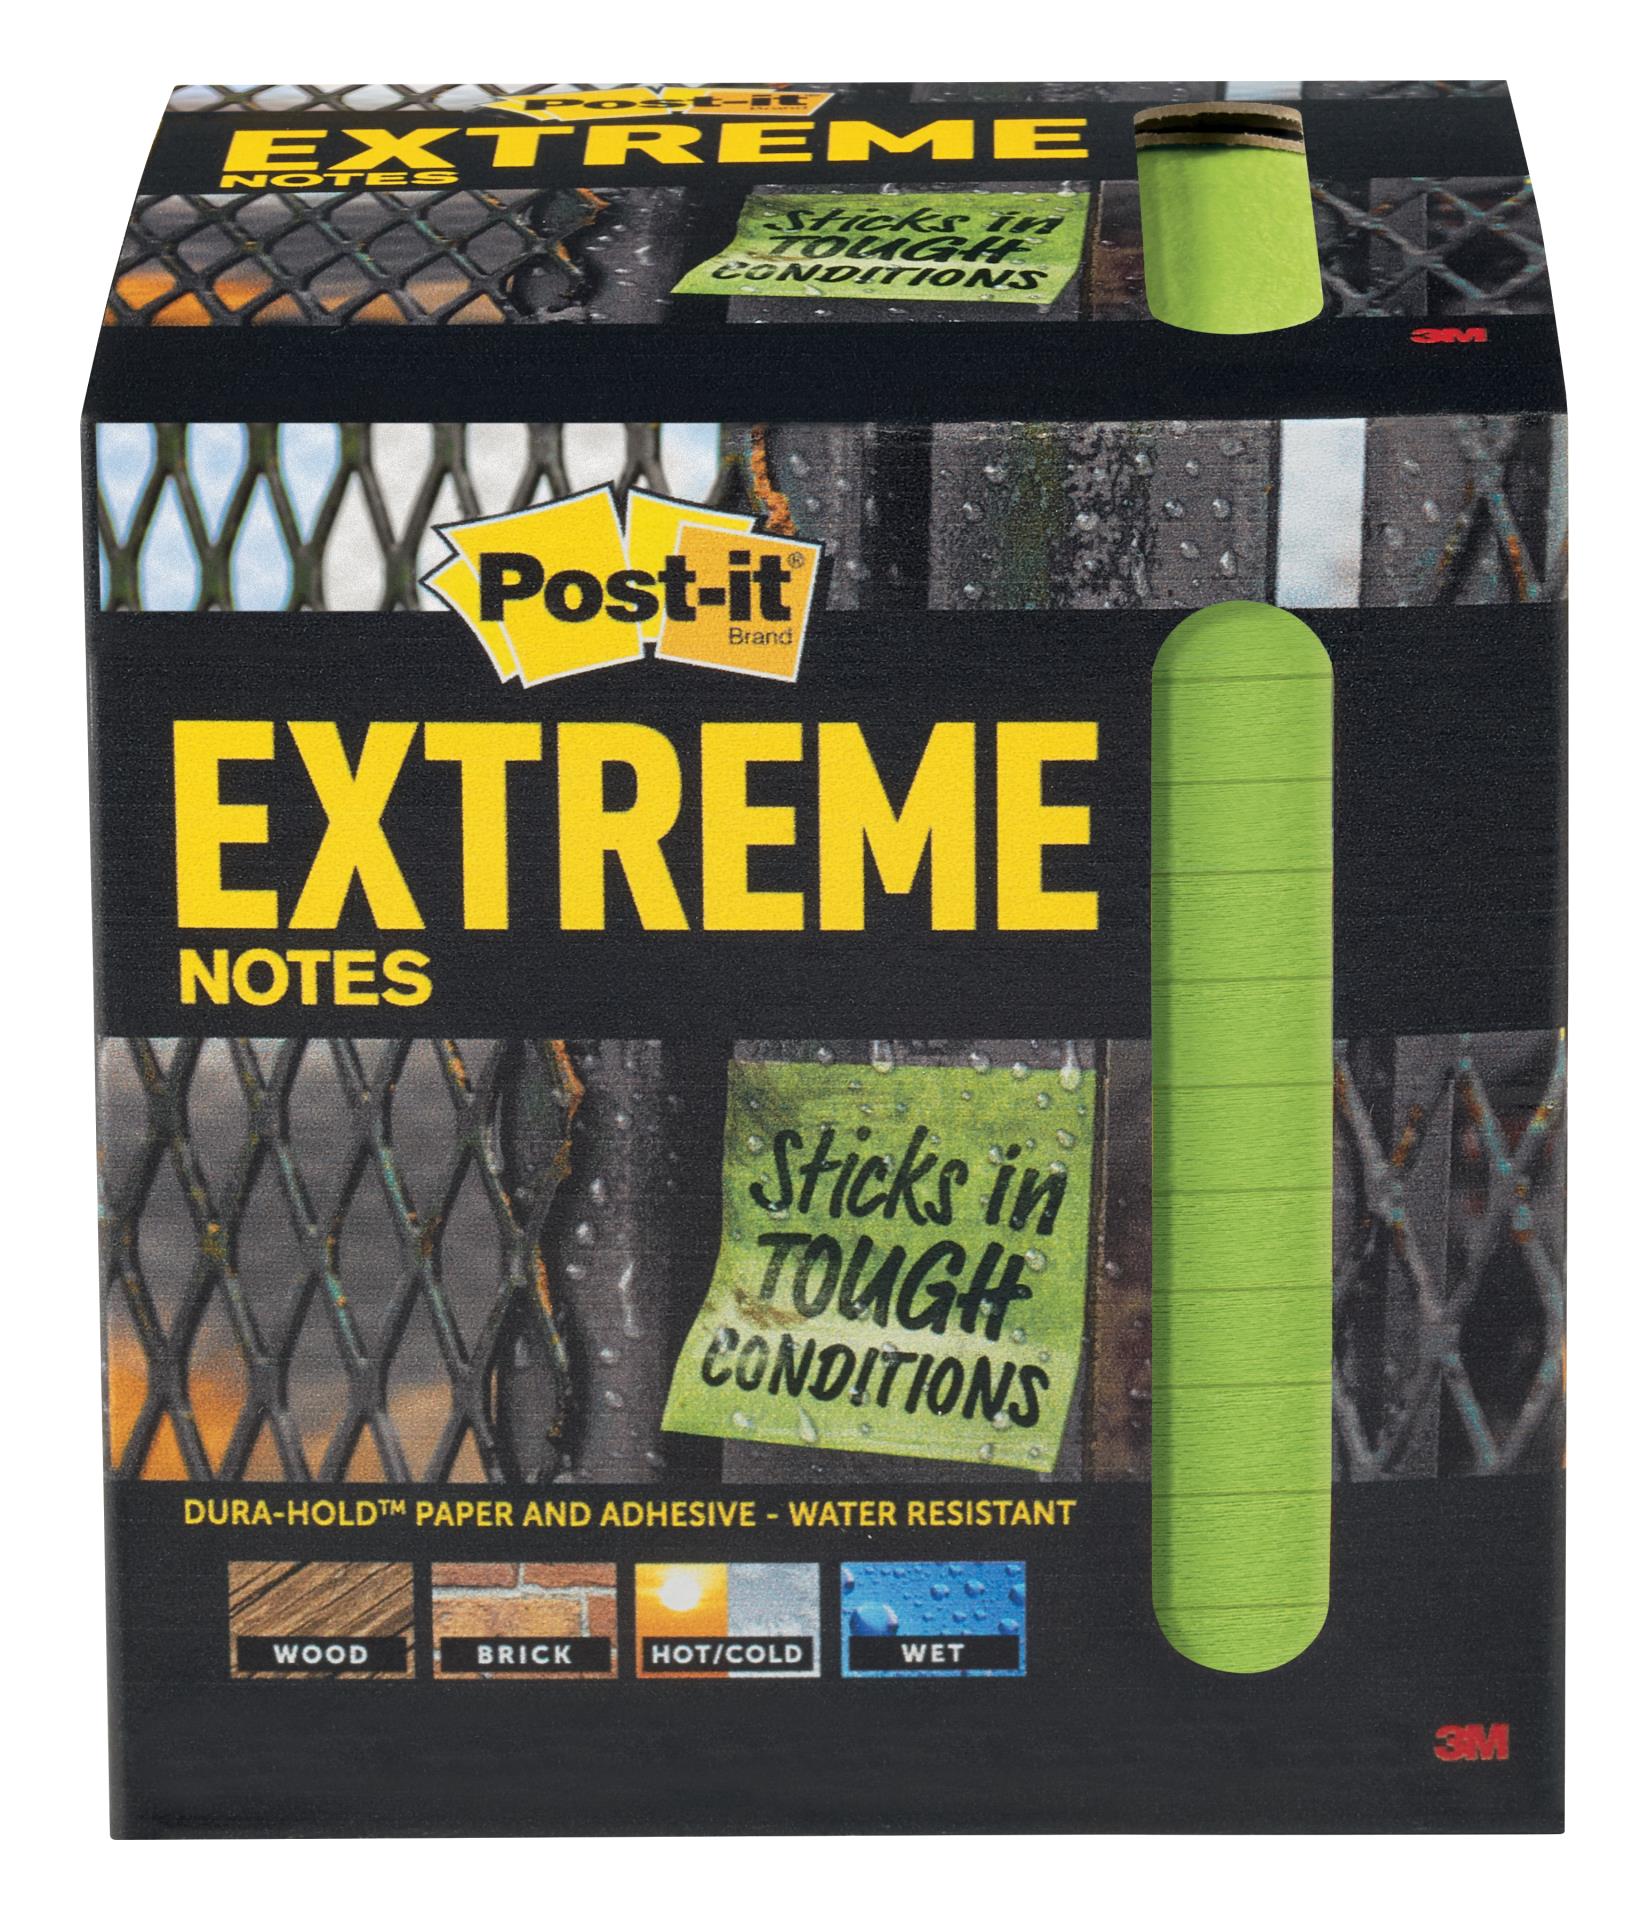 7100156012 - Post-it® Extreme Notes, EXTRM33-12TRYG, 3 in x 3 in (76 mm x 76 mm)